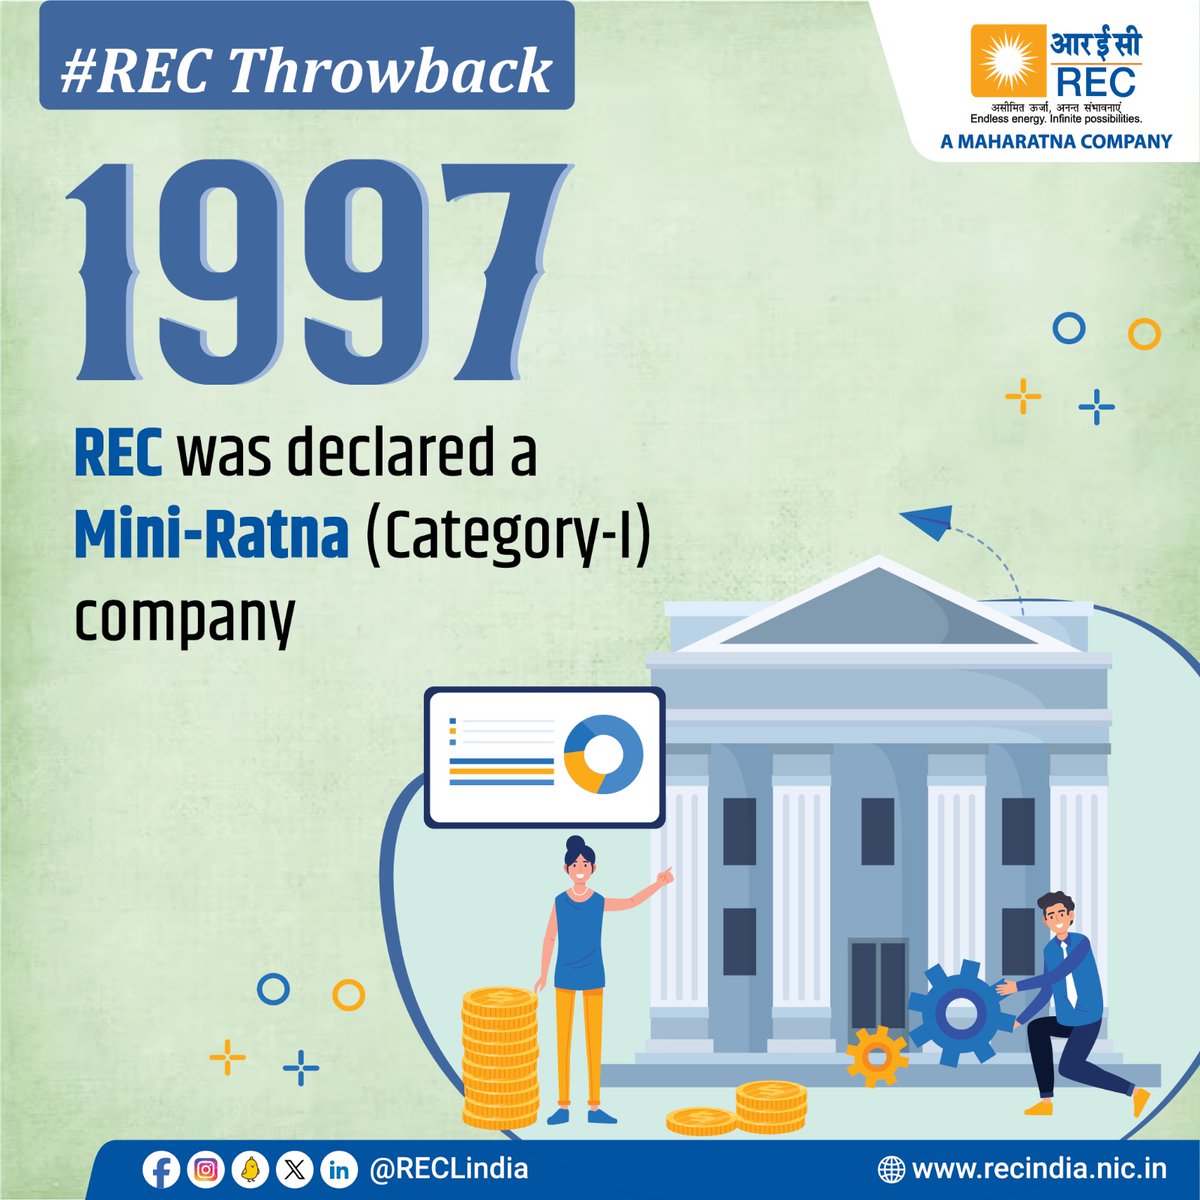 From attaining the Mini-Ratna company status in 1997 to its current status as a Maharatna, the highest status accorded to a Central Public Sector Enterprise, #REC’s journey has followed an outstanding growth trajectory. Do you know in which year was the Maharatnastatus accorded